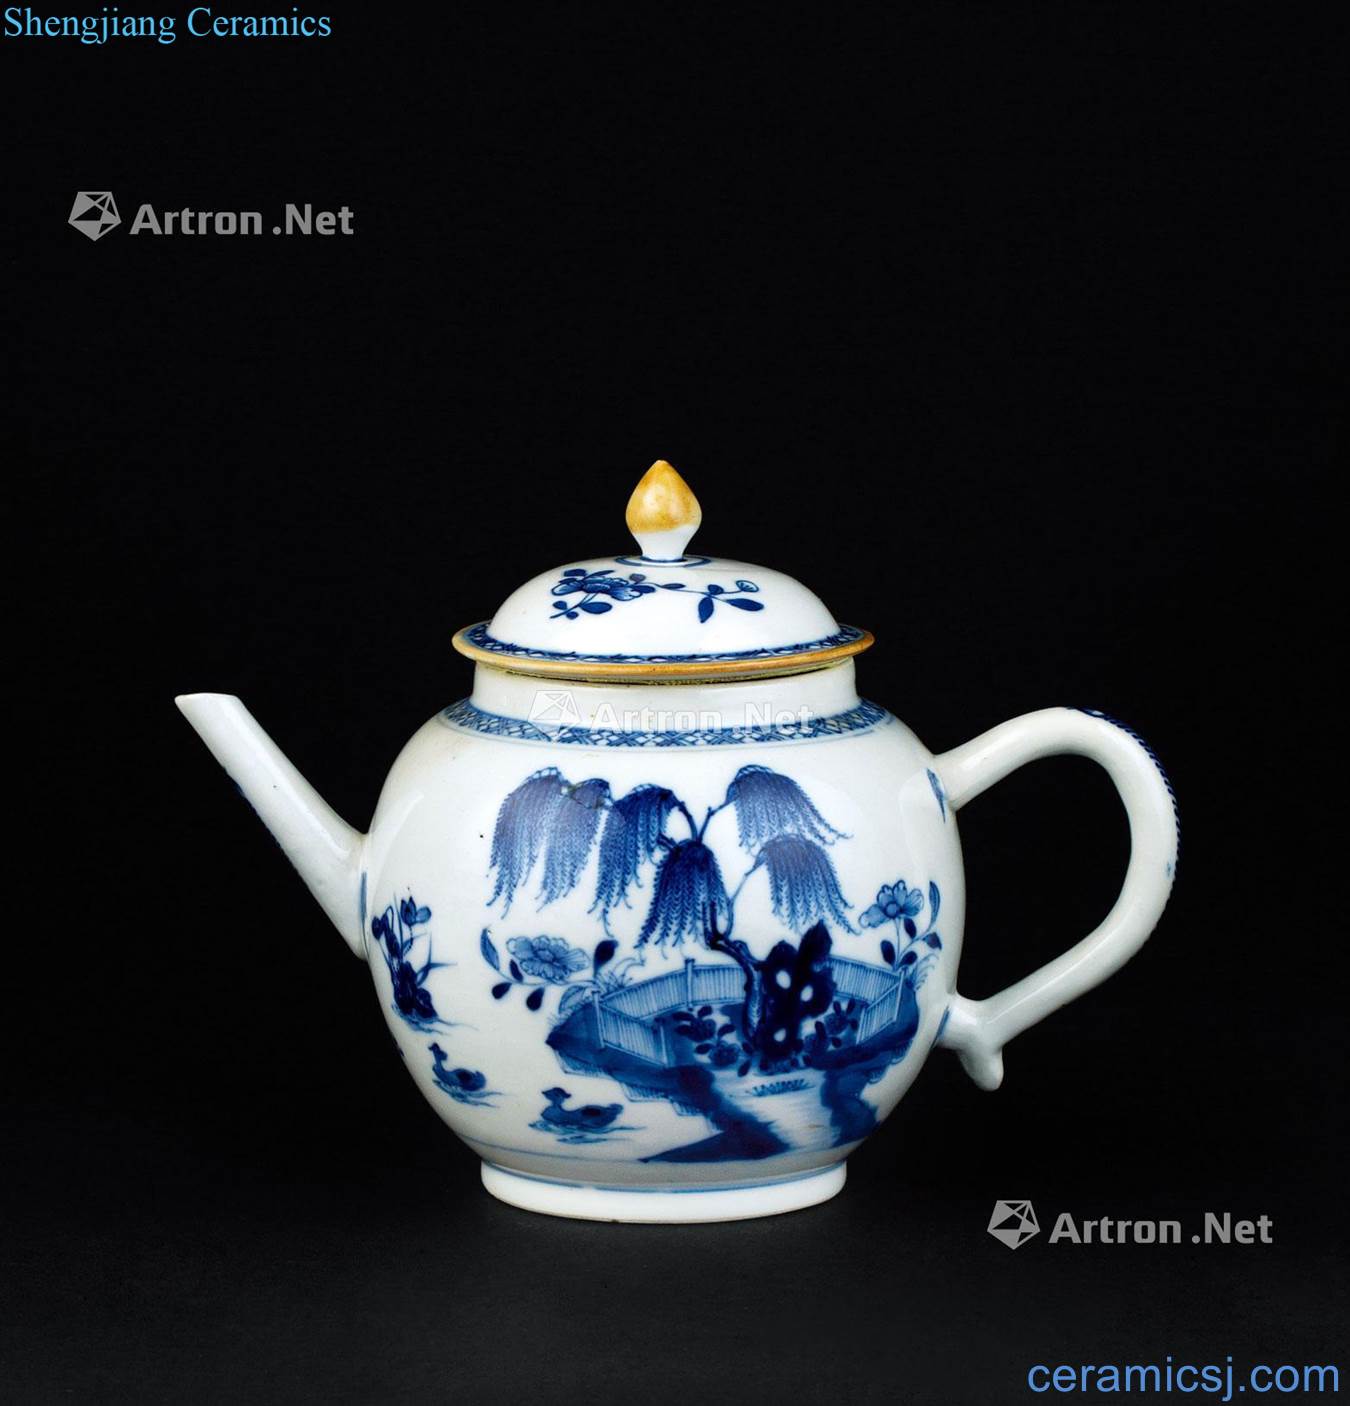 In the qing dynasty (1644 ~ 1911) blue and white landscape floral print teapot